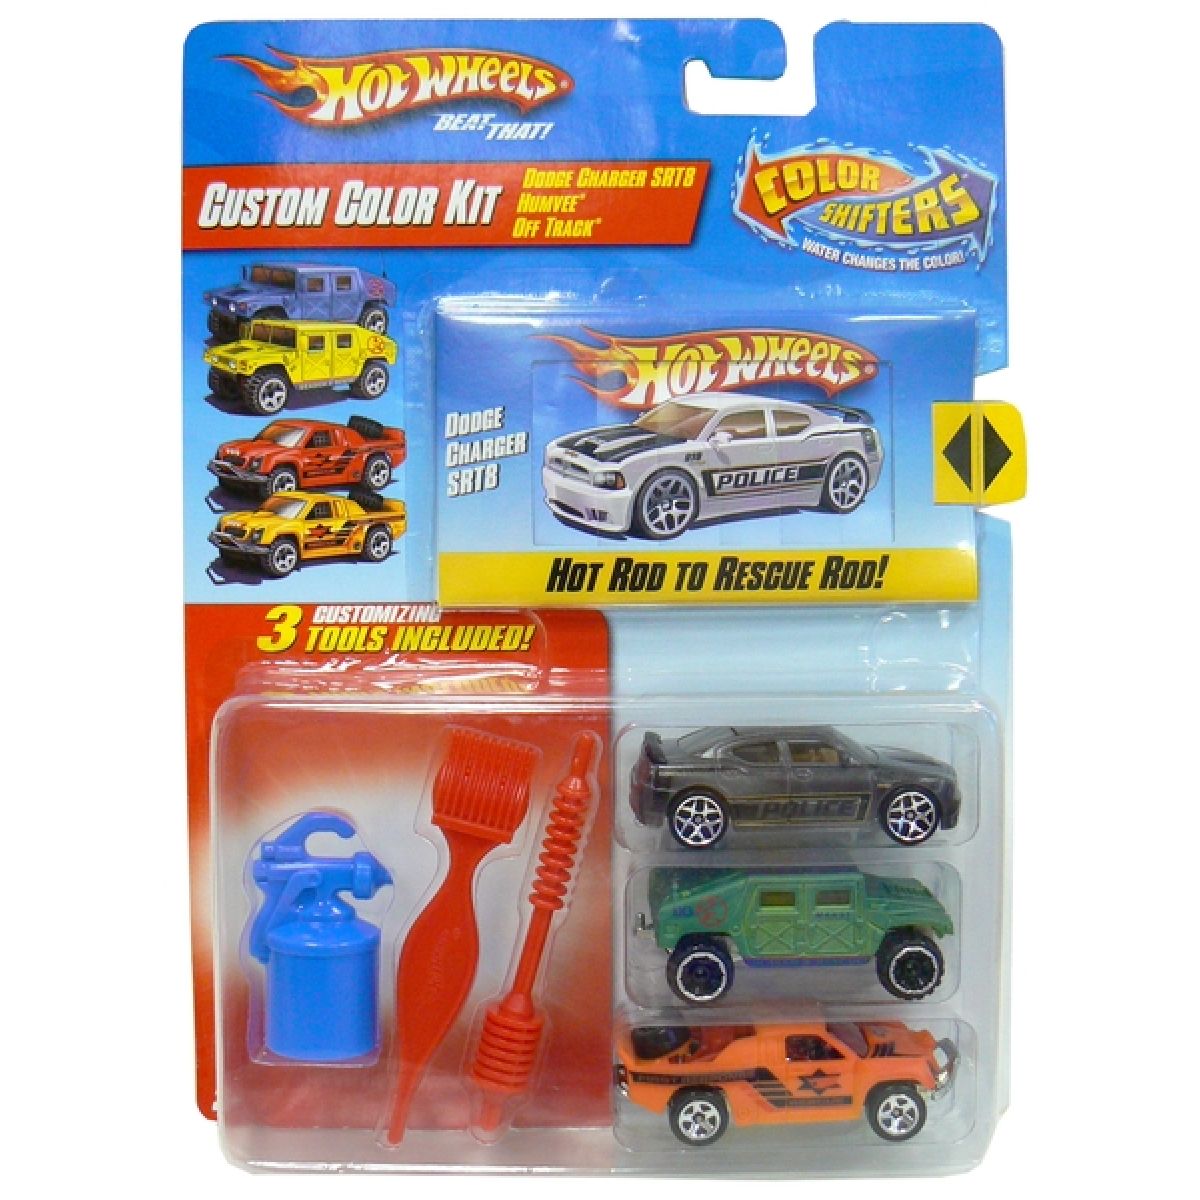 Hot Wheels R9602 Custom Color Kit - Hot rod to rescue rod